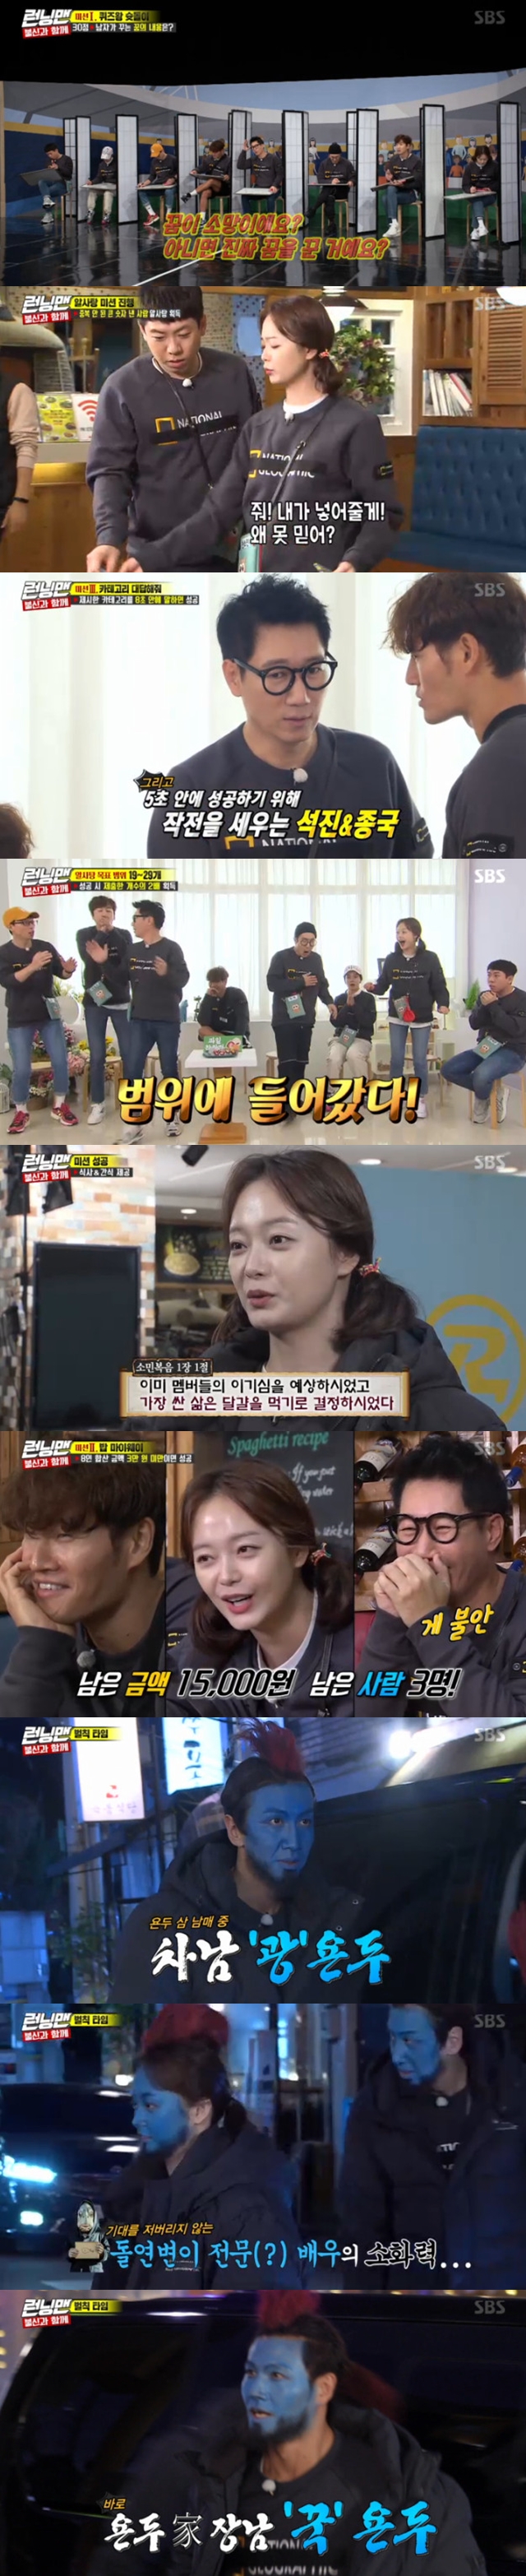 Running Man gave the fun of popping without a guest.On SBS Running Man, which was broadcast on December 1, the power passing race With Disbelief was held.On this day, Running Man showed Race with distrust which was prepared to reflect on the suspicions and imitations of the past few weeks and unite.The members ran and ran to avoid the Yondu make-up, and there were no Spy or guests who used it often on this day.The first mission was to pass the correct answer with the Queez King Shotman.Game was played, including English word mission, childhood photo protagonist hit, and film writing starring Lee Byung-hun.Even in the midst of all kinds of fouls, meaningful power answers came out.On the other hand, in the film writing starring Lee Byung-hun, Jeon So-min gives the wrong answer and is suddenly suspected of being Spy.The second mission is to choose one of the eight different menus with different prices as Bob My Way. If the sum is less than 30,000 won, the power will pass.Ji Suk-jin, who blurred the atmosphere, was Jeon So-min who made use of such a Running Man atmosphere.Ji Suk-jin chose expensive soy sauce and poured cold water on the conversation agreement.On the other hand, Jeon So-min was revered as an icon of trust and sacrifice, choosing a boiled egg with 500 won; eventually, thanks to Jeon So-min, everyone could have a warm meal.The third mission was a successful game when you told all of the categories that you presented as Answer the category in 8 seconds so that they did not overlap.Four people were outraged, including Yoo Jae-Suk Lee Kwang-soo Ji Suk-jin Kim Jong-kook, as Haha was wrong alone.As soon as they heard the sound, they woke up at the same time and tried to kill Haha, making everyone laugh.The final mission is the successful mission Those who do not cross the line if the amount of 8 people is more than 25,000 won.After winning the 10,000 won thanks to Yang Se-chans heroic performance, Running Man filming quickly became a crucible of enthusiasm.After all the Game, Yang Se-chan won the final first place.Kim Jong-kook was second, Ji Suk-jin was third, Song Ji-hyo was fourth, Haha and Yoo Jae-Suk were fifth, Jeon So-min was seventh, and Lee Kwang-soo was last.Lee Kwang-soo Jeon So-min sold the bread after making up the yondoo, and Kim Jong-kook, who they pointed out, joined it.They were humiliated to go out to the cold weather streets and sell the buns with yondou make up.bak-beauty